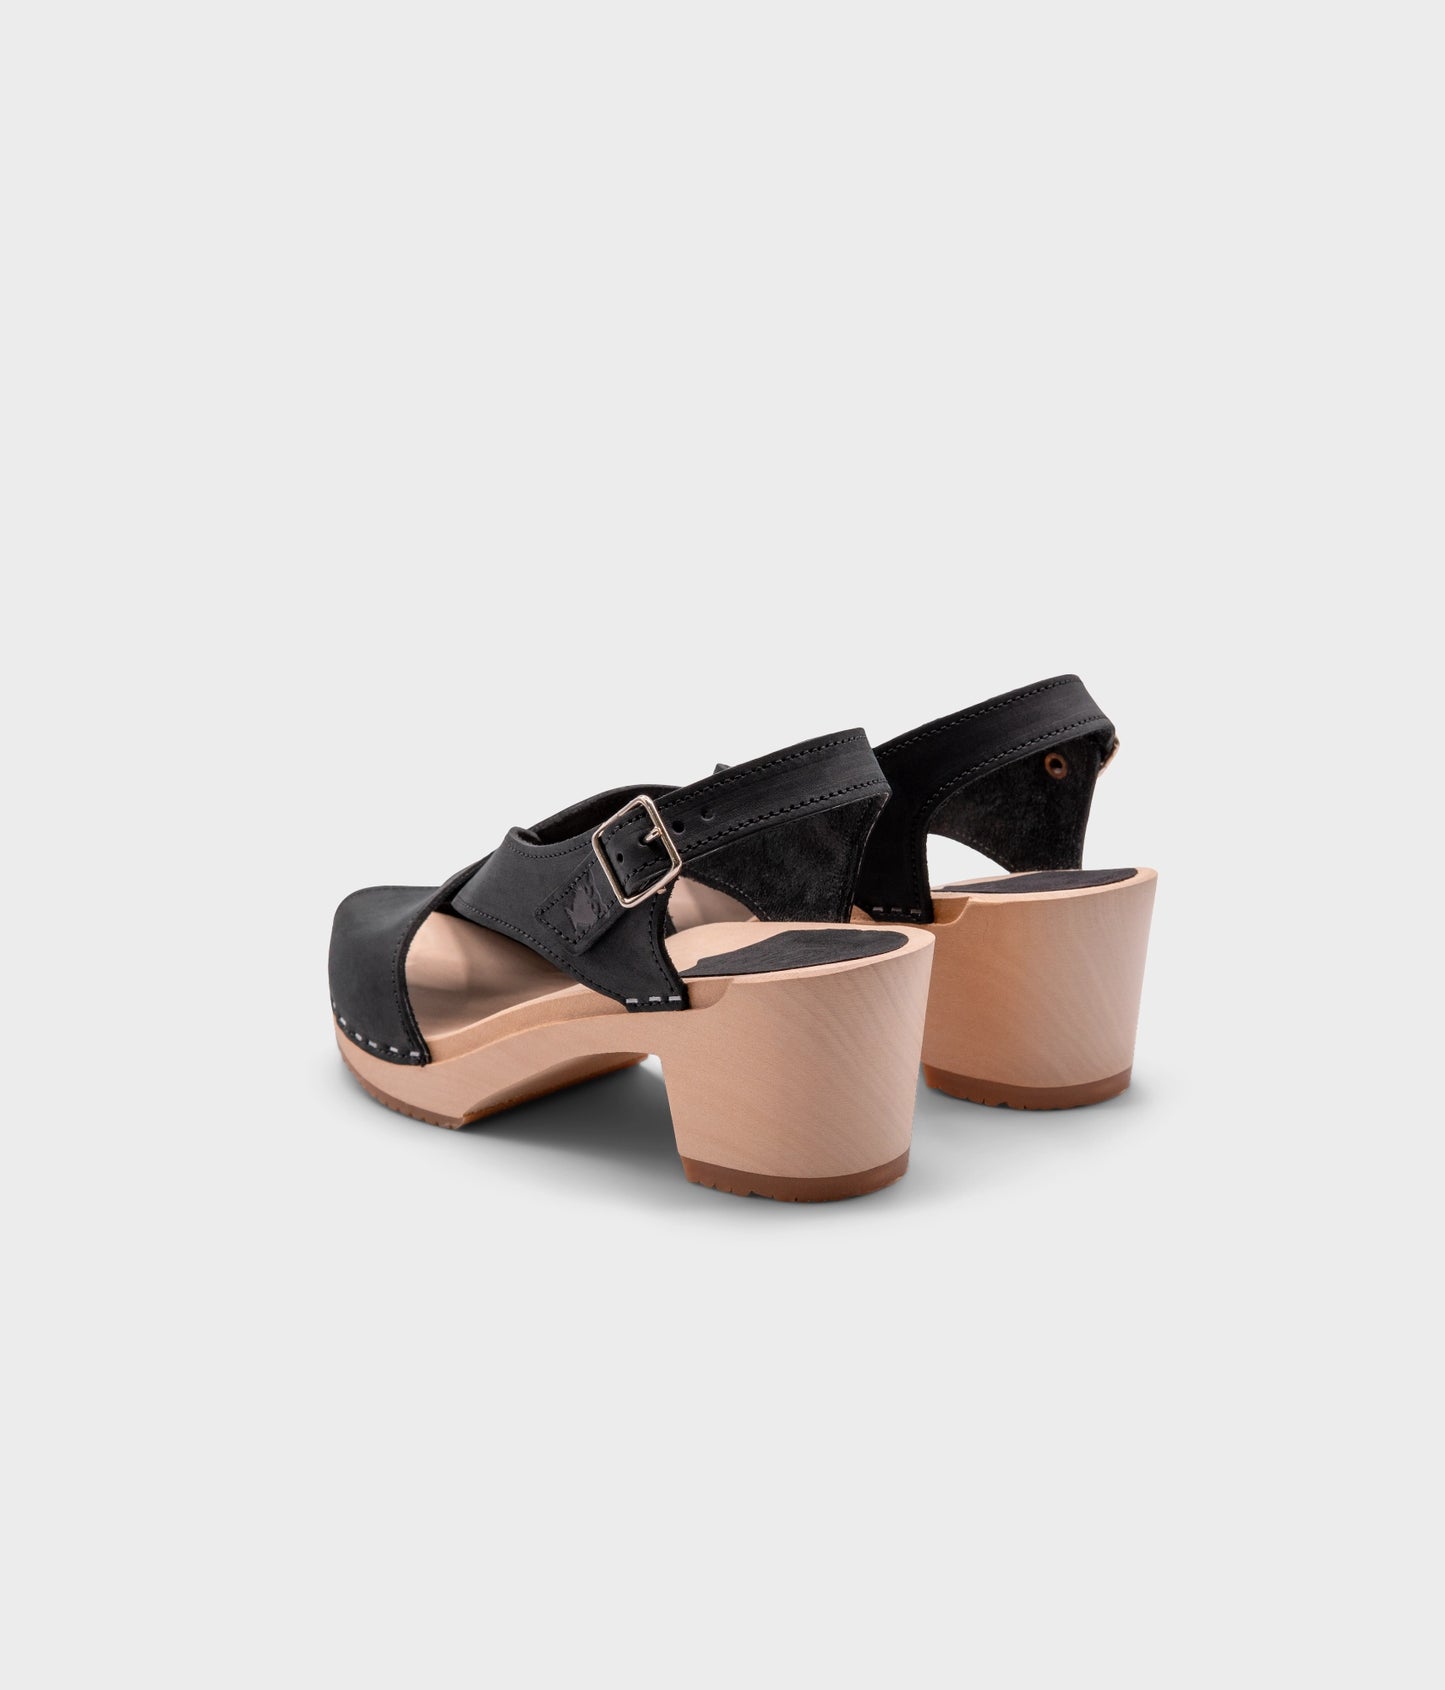 high heeled criss cross clog sandals in black nubuck leather stapled on a light wooden base